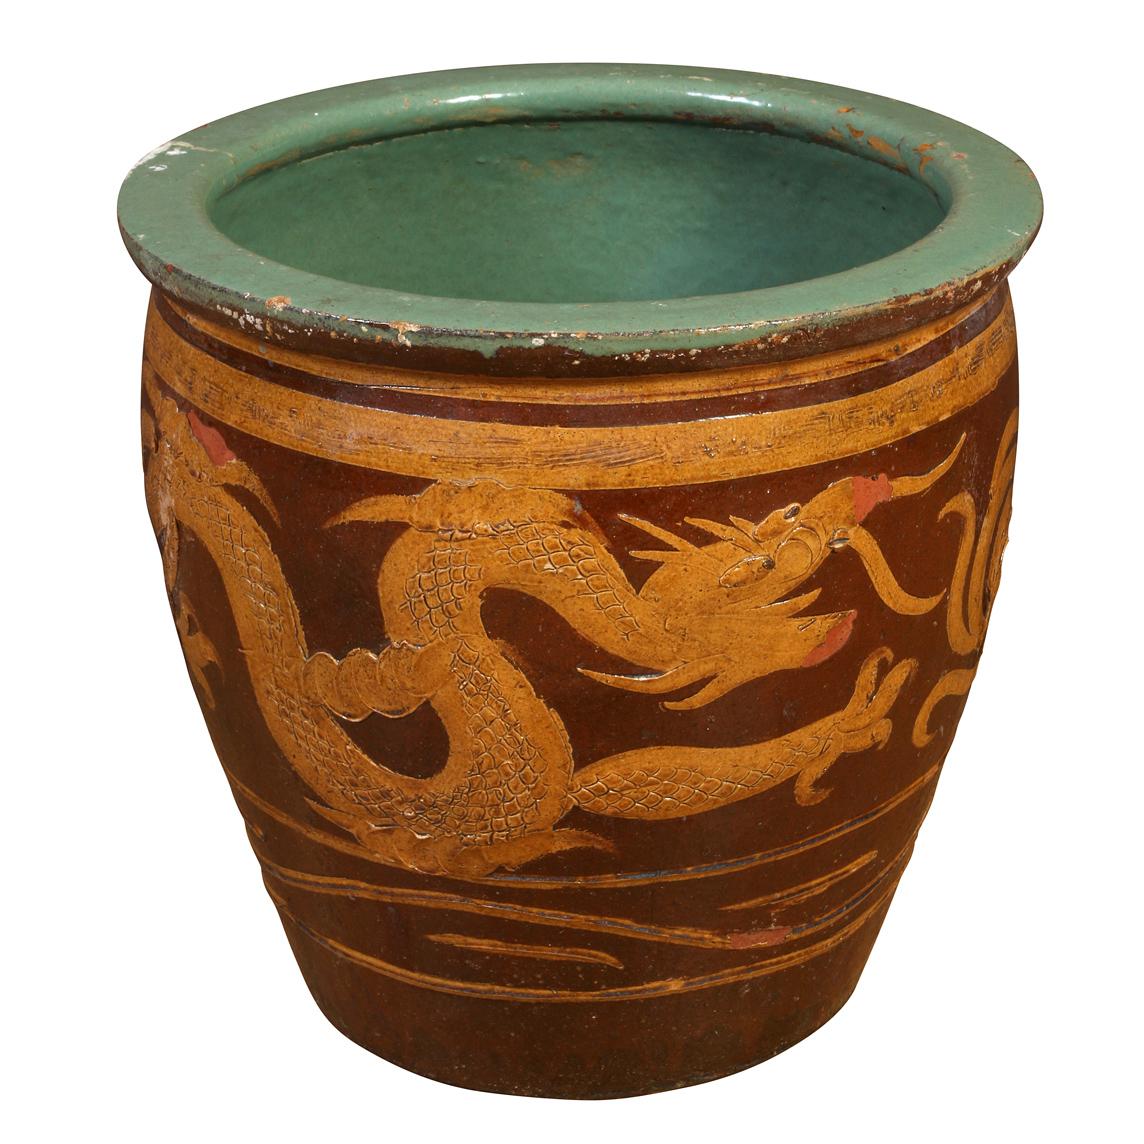 A pair of ceramic jardinieres with a raised Chinese  dragon motif encircling the round planters.  They planters are brown in color with ochre dragons and other decorative Asian motifs and a green interior and lip.  One planter is faded in color more